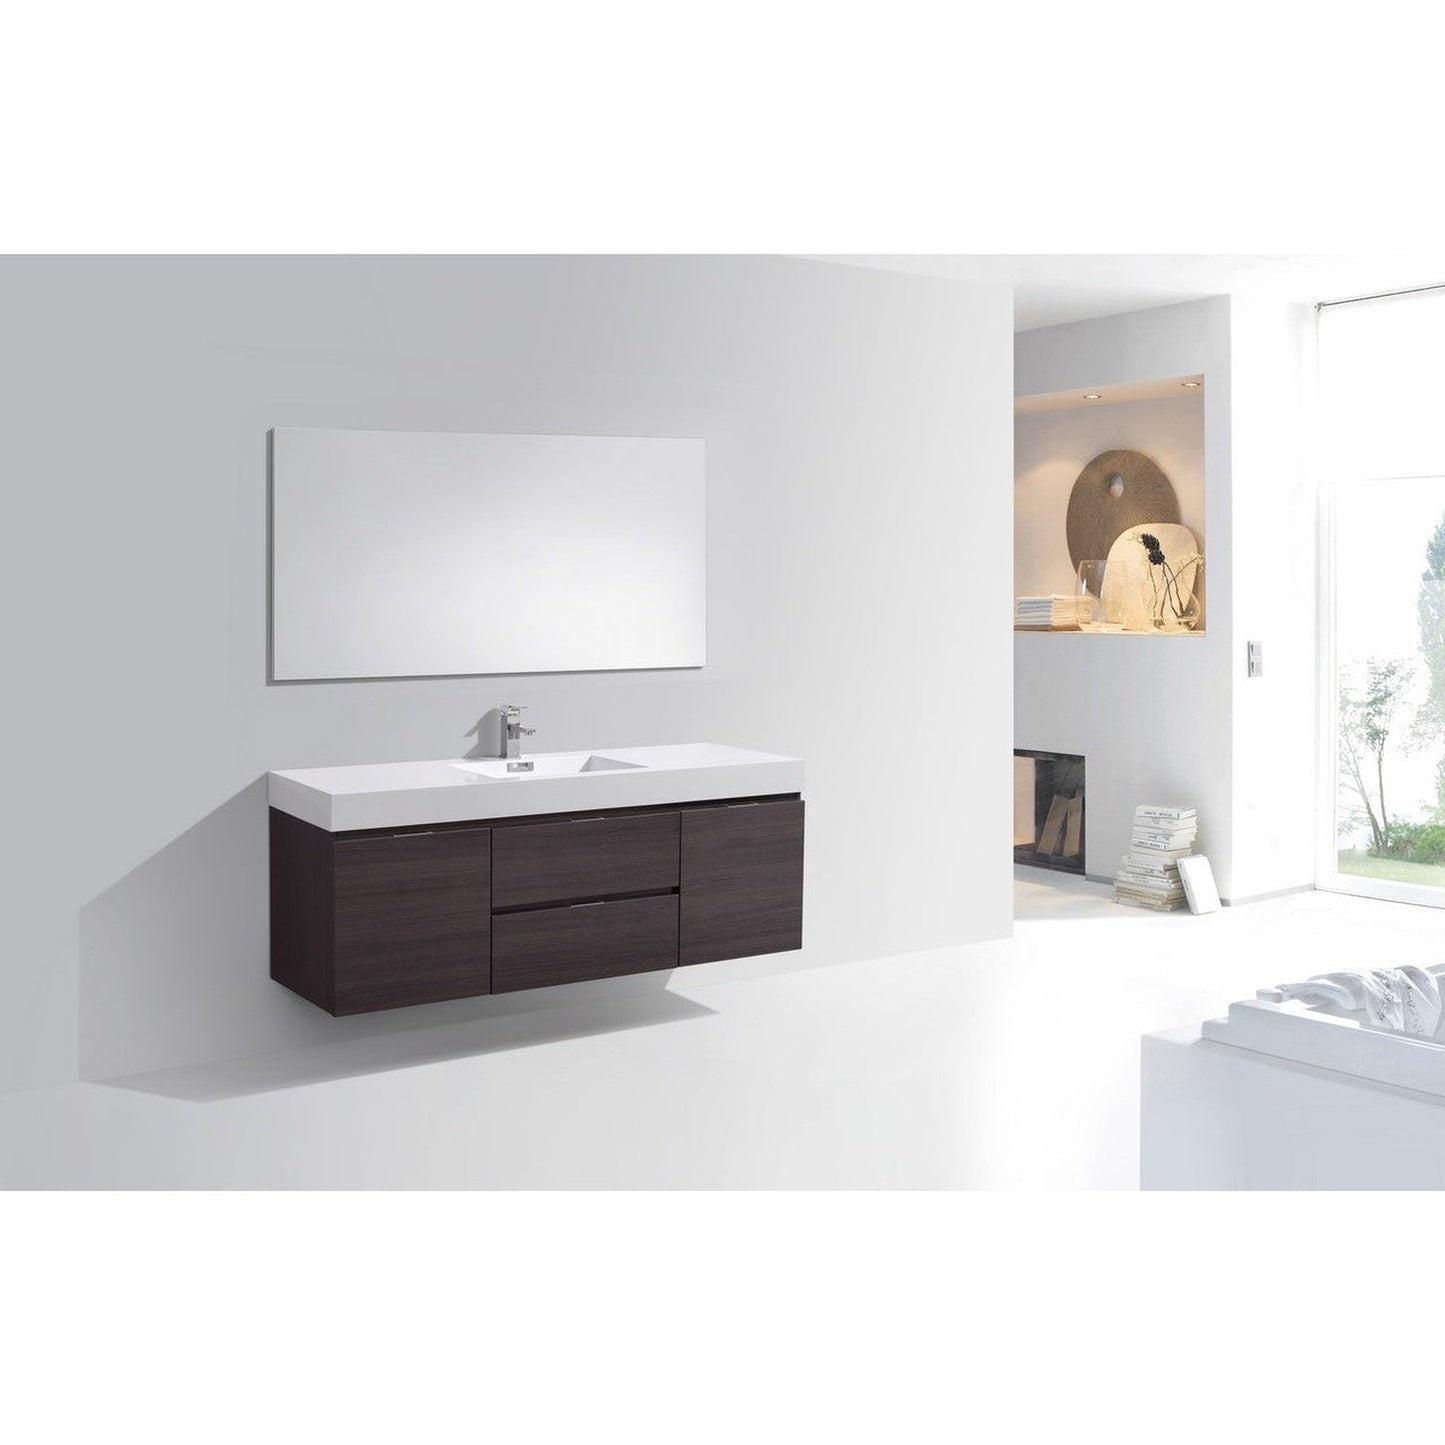 KubeBath Bliss 60" High Gloss Gray Oak Wall-Mounted Modern Bathroom Vanity With Single Integrated Acrylic Sink With Overflow and 55" Wood Framed Mirror With Shelf